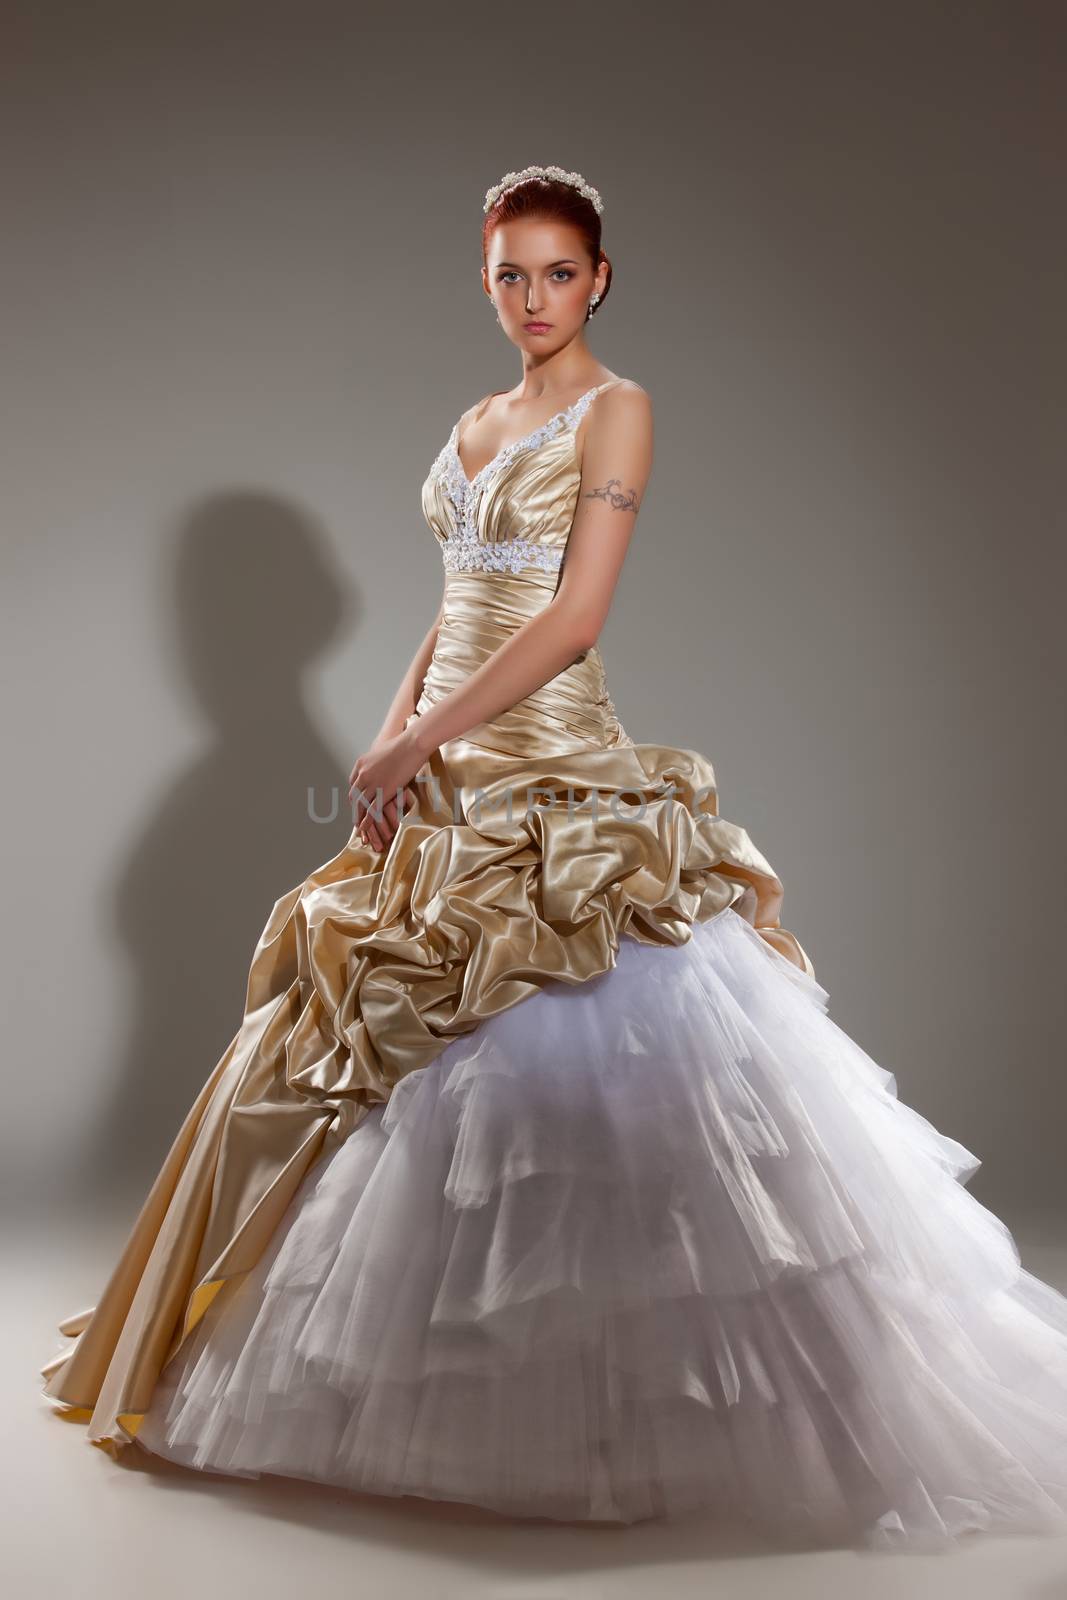 Young beautiful woman in a wedding dress on a studio background